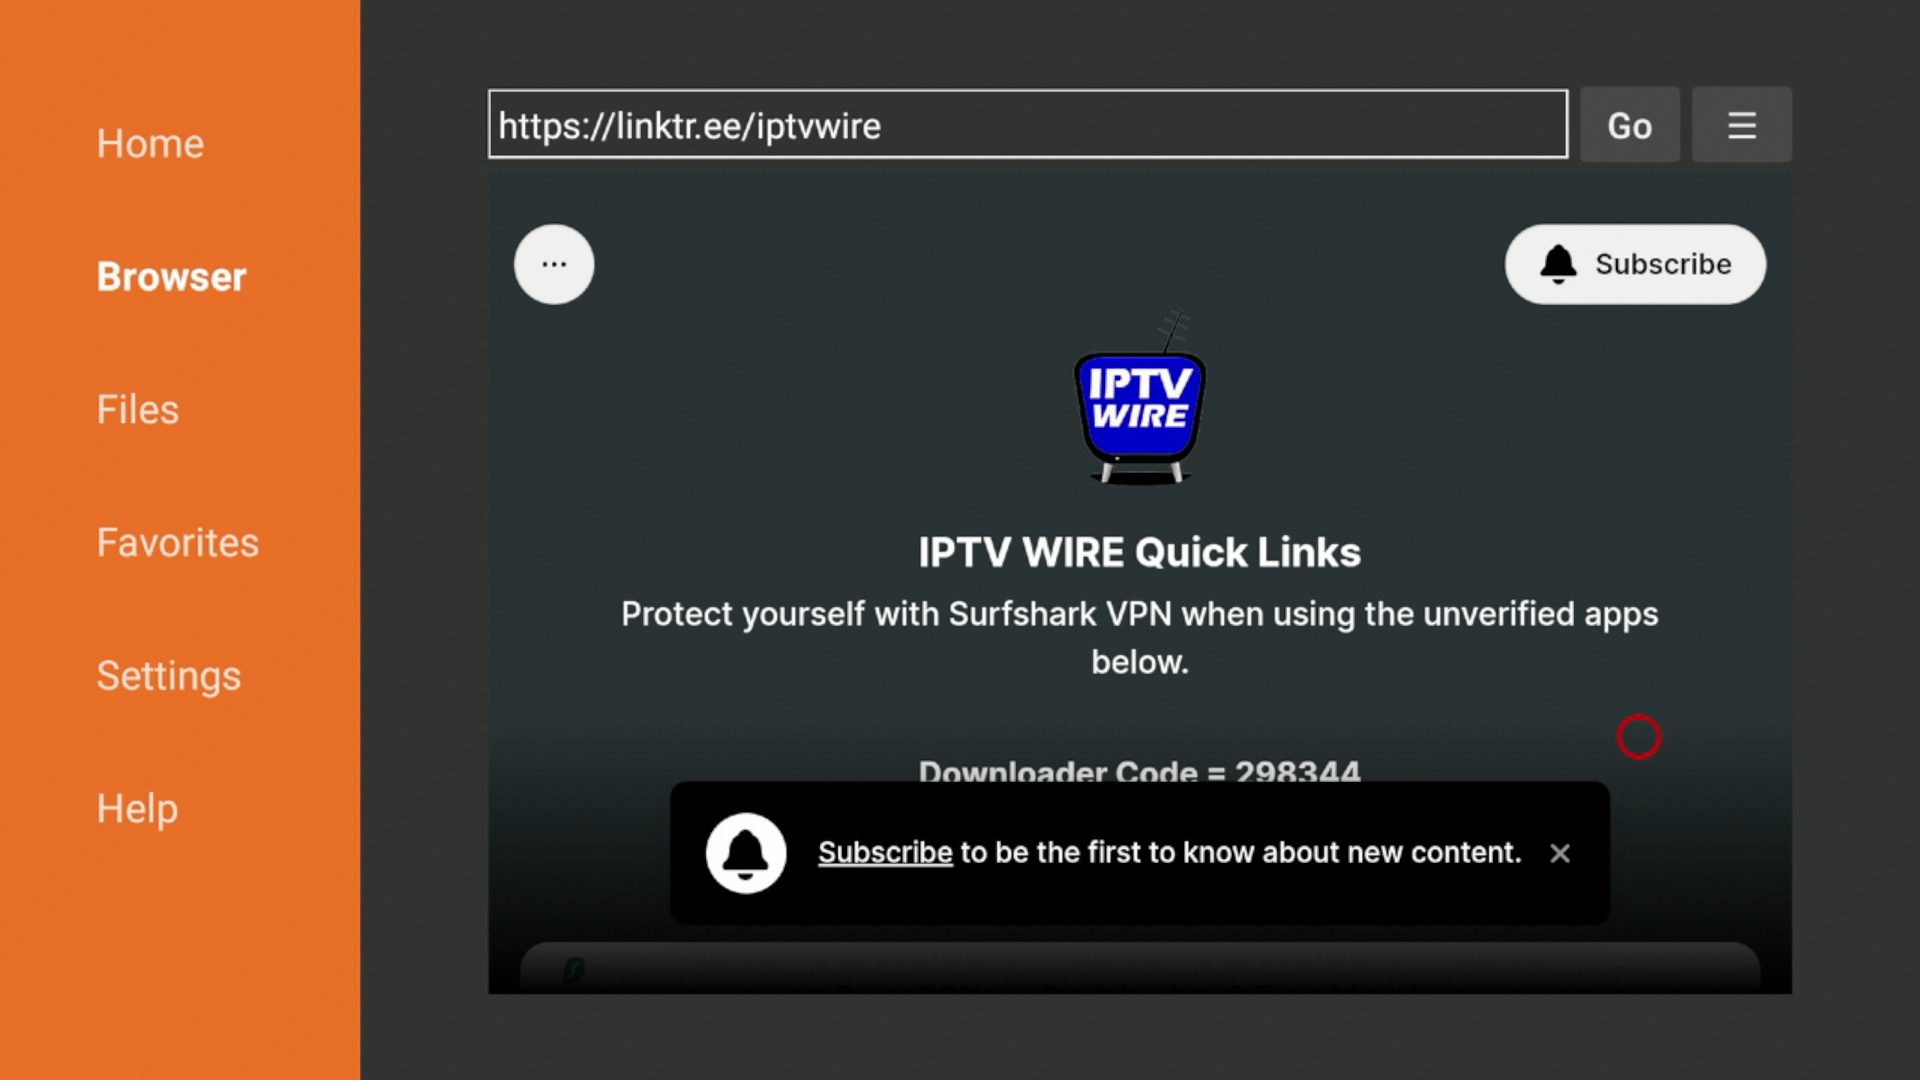 You are now on the IPTV Wire Quick Links page.